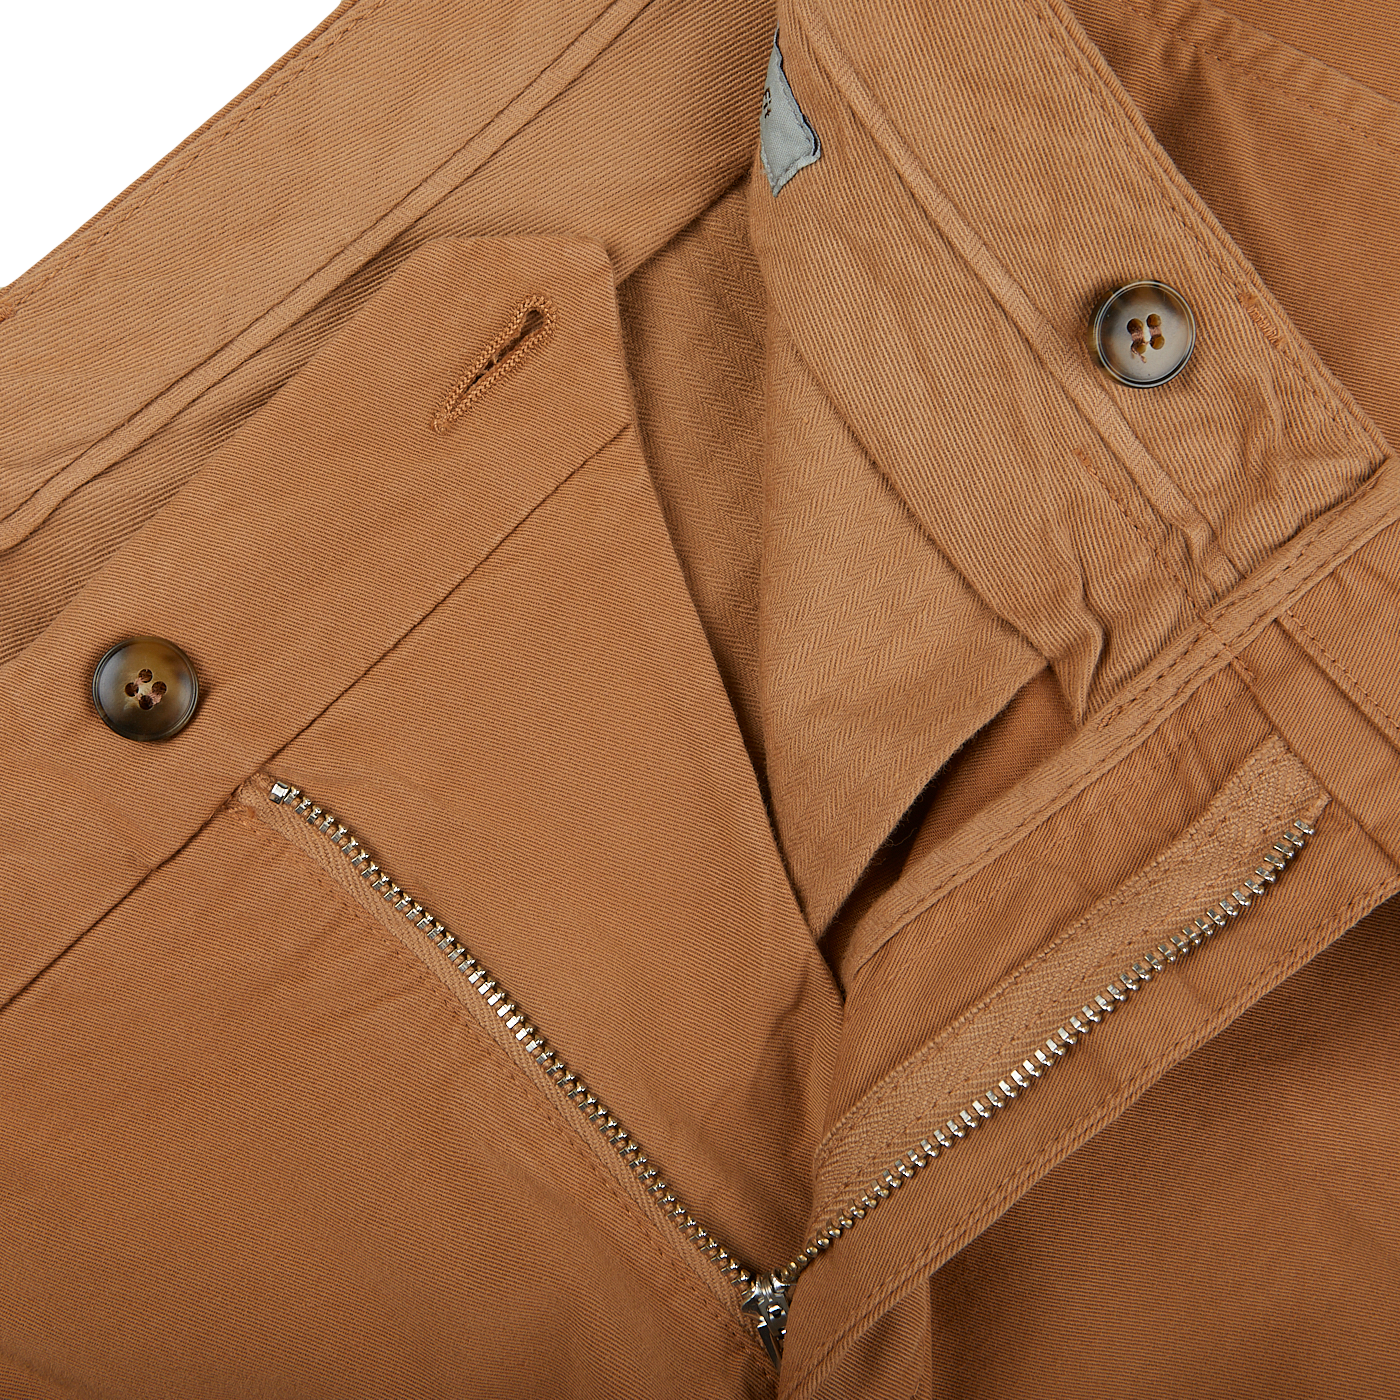 A close up of a pair of Canali Terracotta Cotton Stretch Flat Front Chinos with zippers, showcasing their distressed appearance.